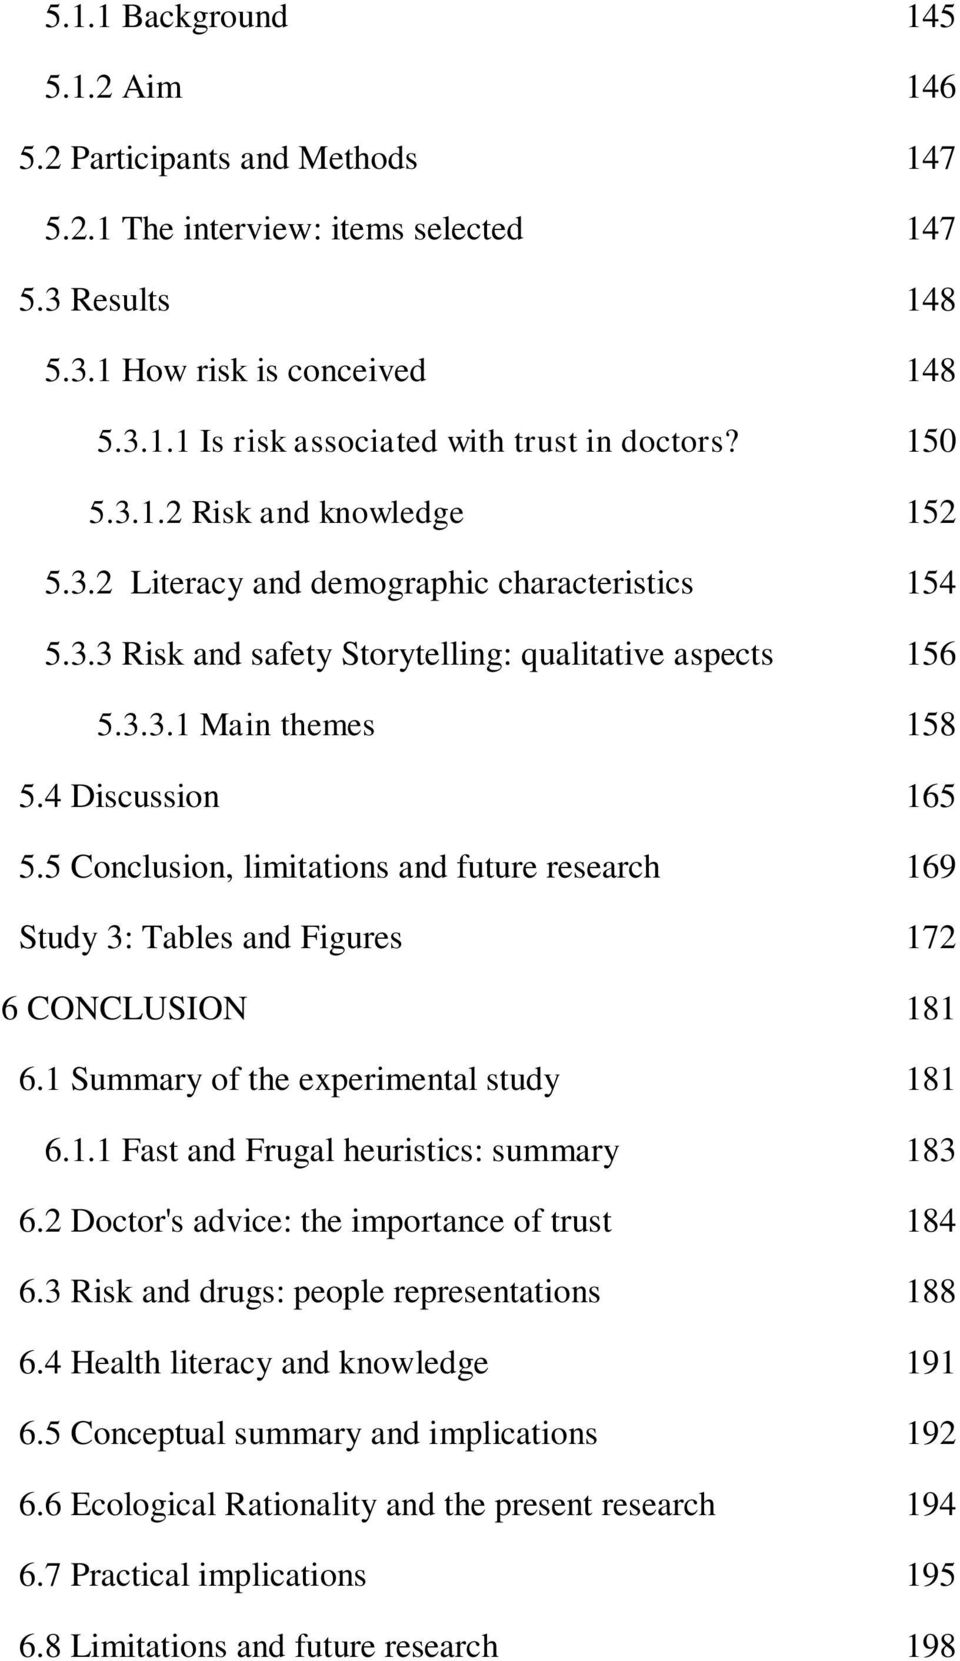 5 Conclusion, limitations and future research 169 Study 3: Tables and Figures 172 6 CONCLUSION 181 6.1 Summary of the experimental study 181 6.1.1 Fast and Frugal heuristics: summary 183 6.